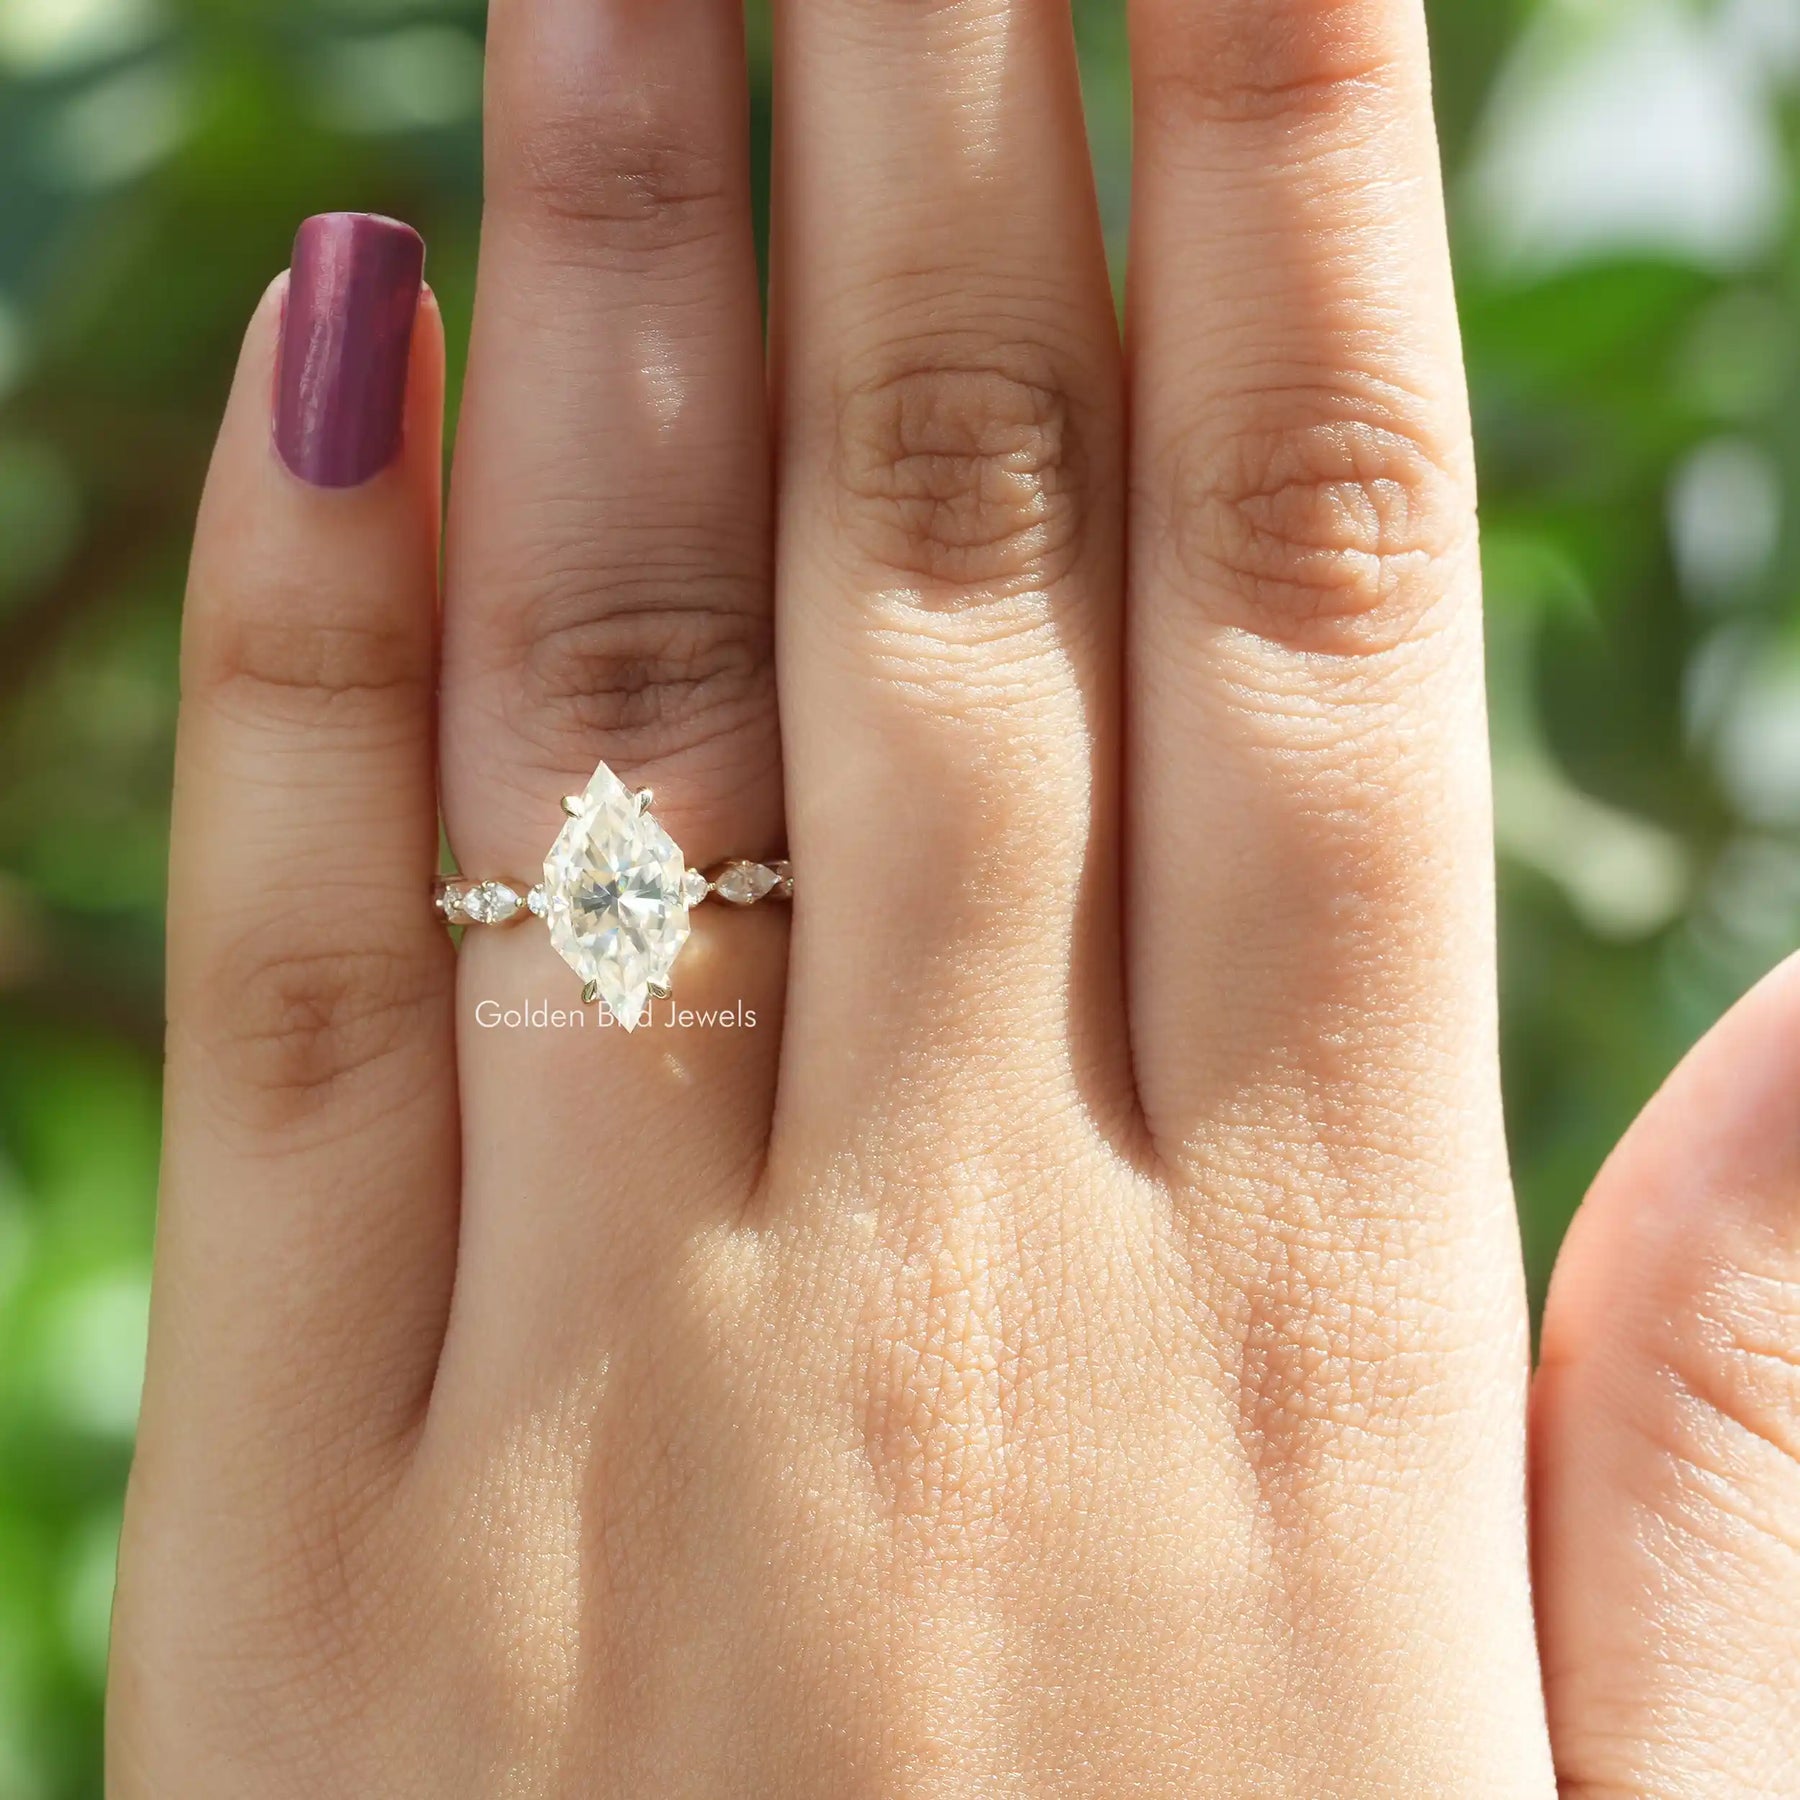 [In finger front view dutch marquise engagement rinbg set in prong setting]-[Golden Bird Jewels]